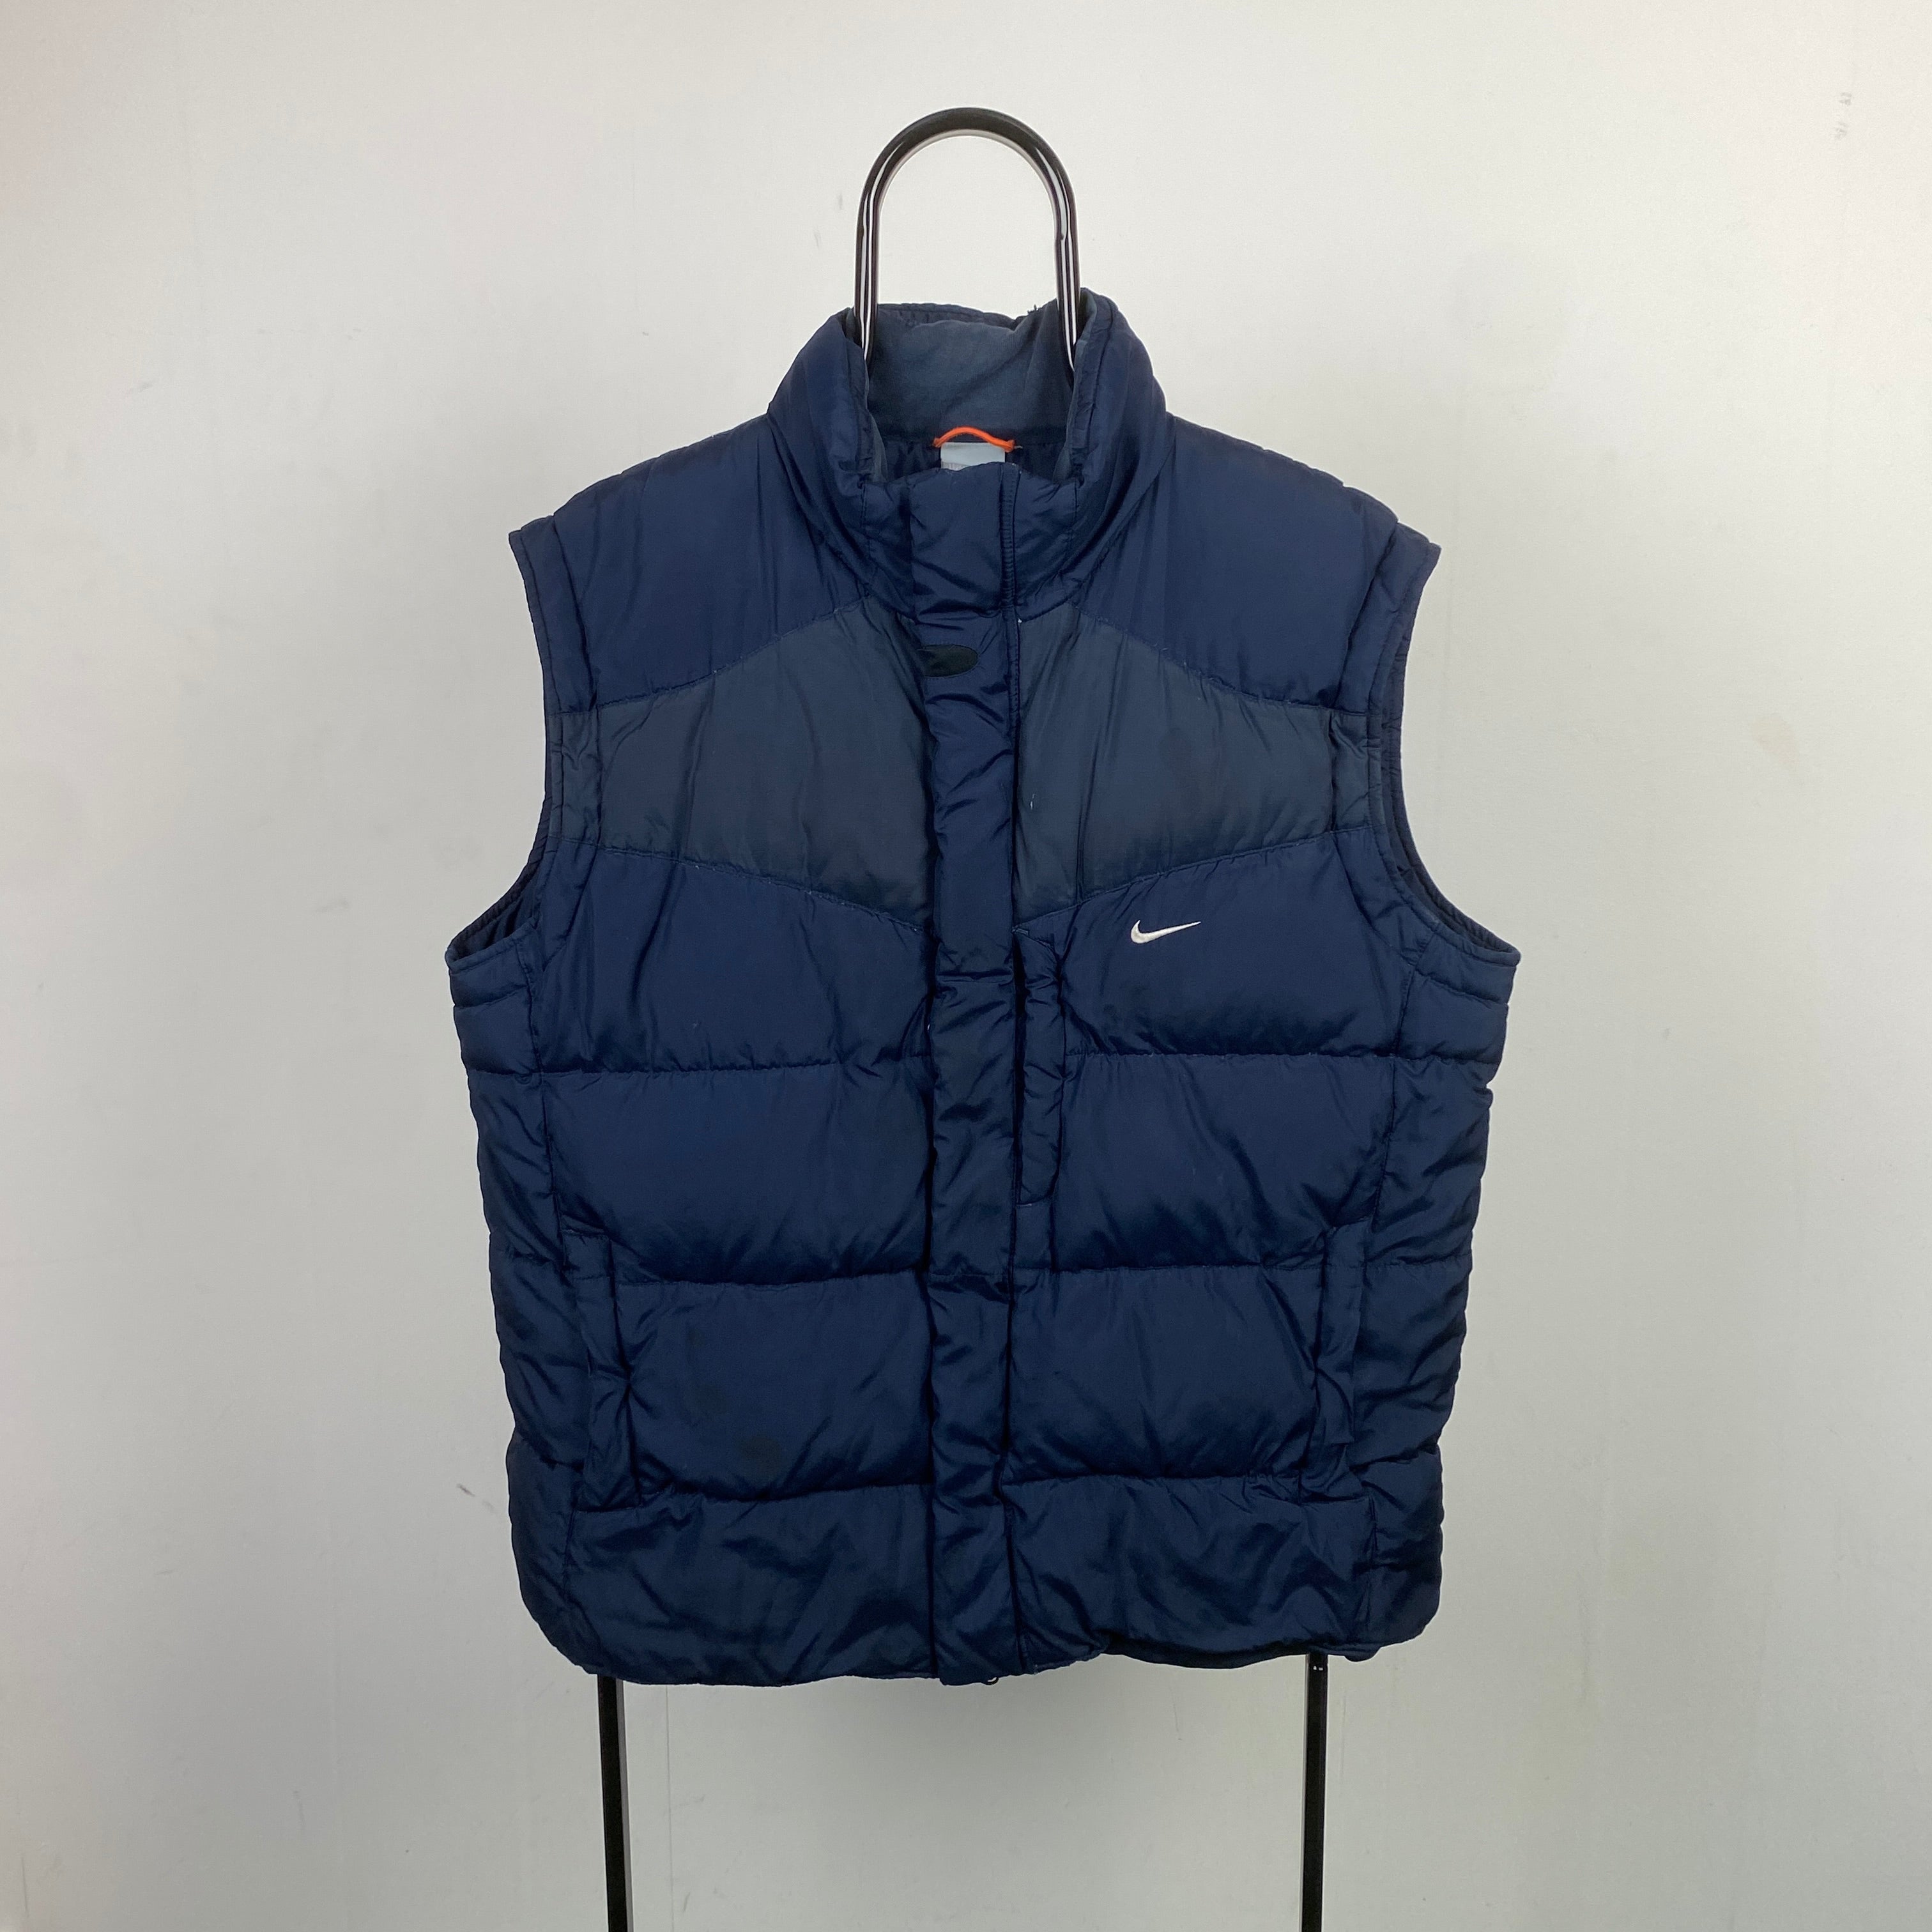 00s Nike Quilted Puffer Gilet Jacket Blue Large